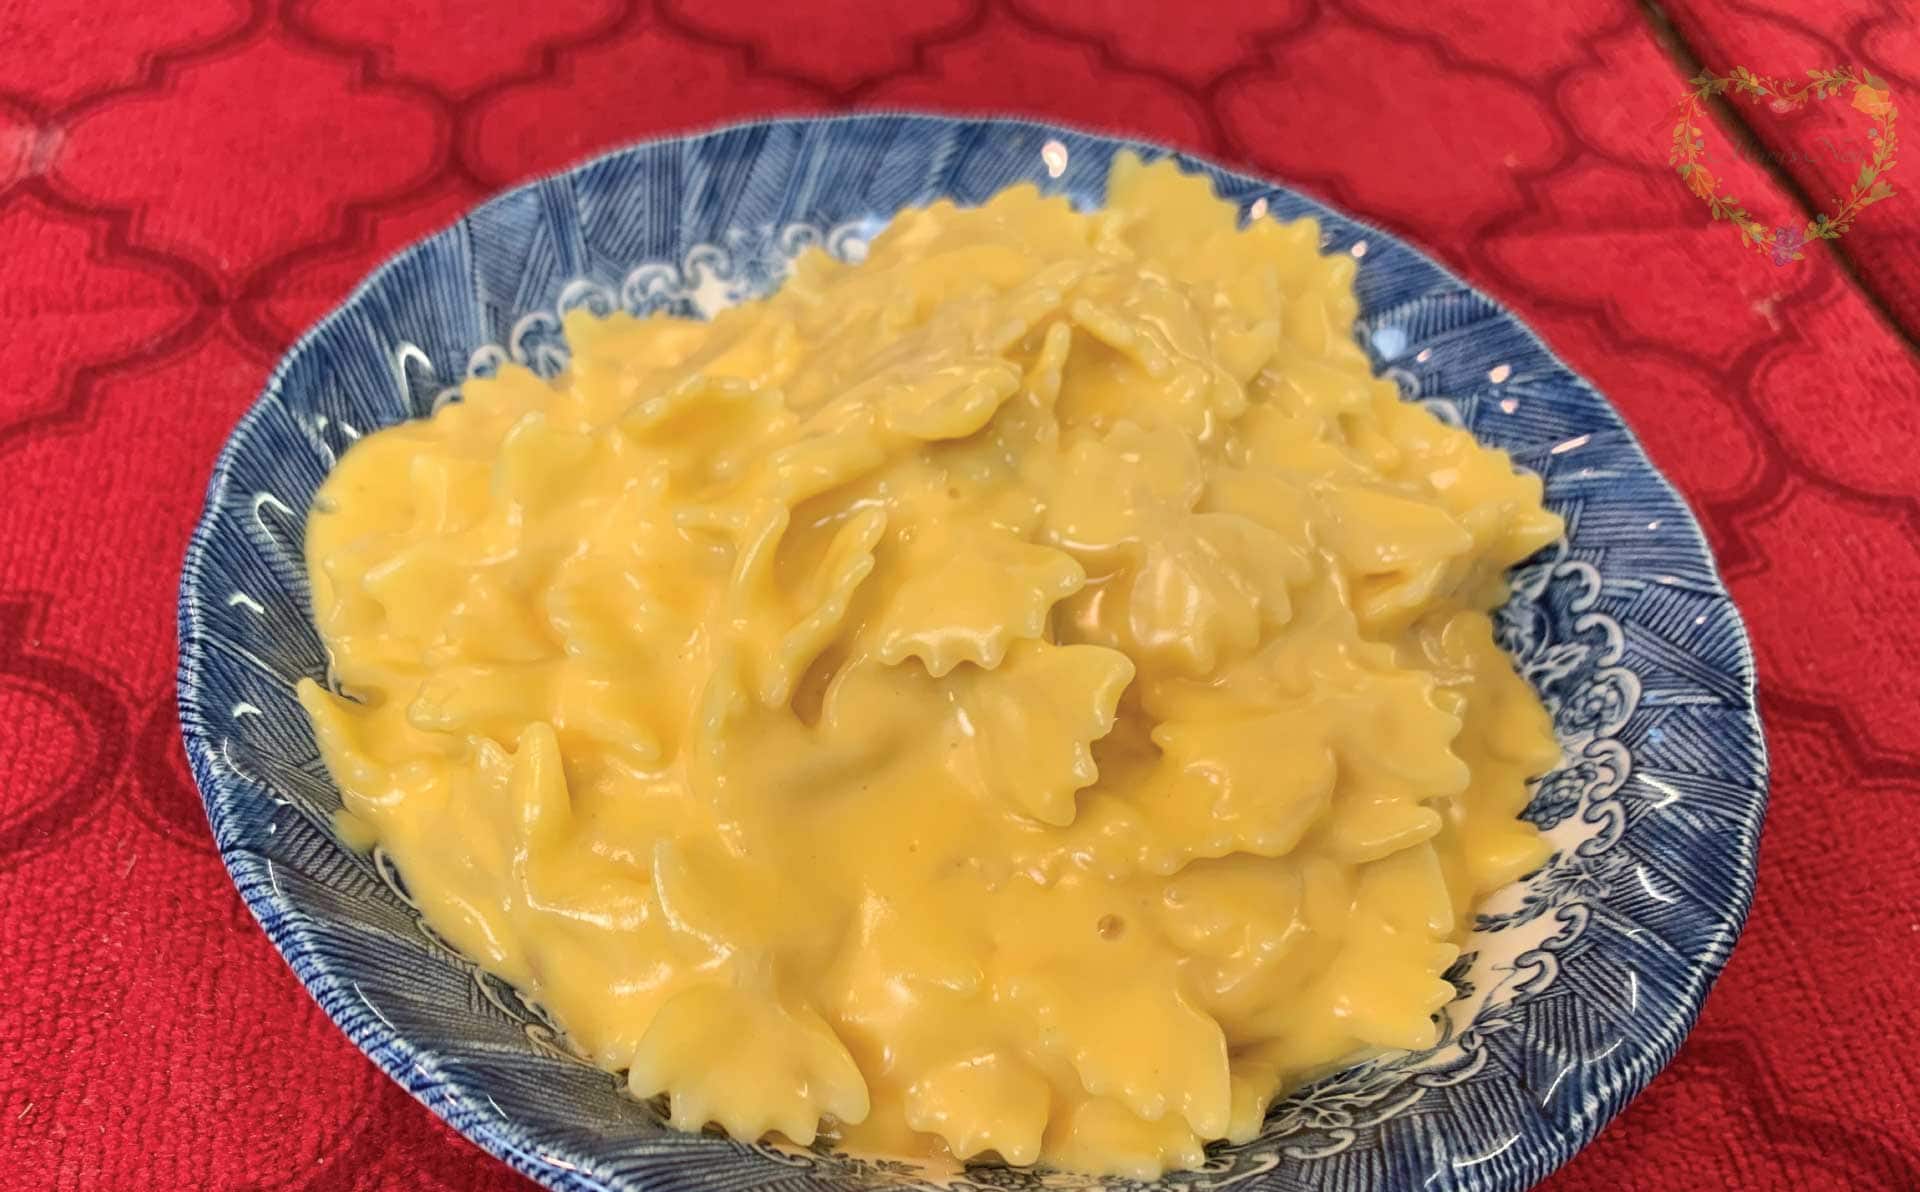 Mary's Nest Stovetop Mac and Cheese Recipe